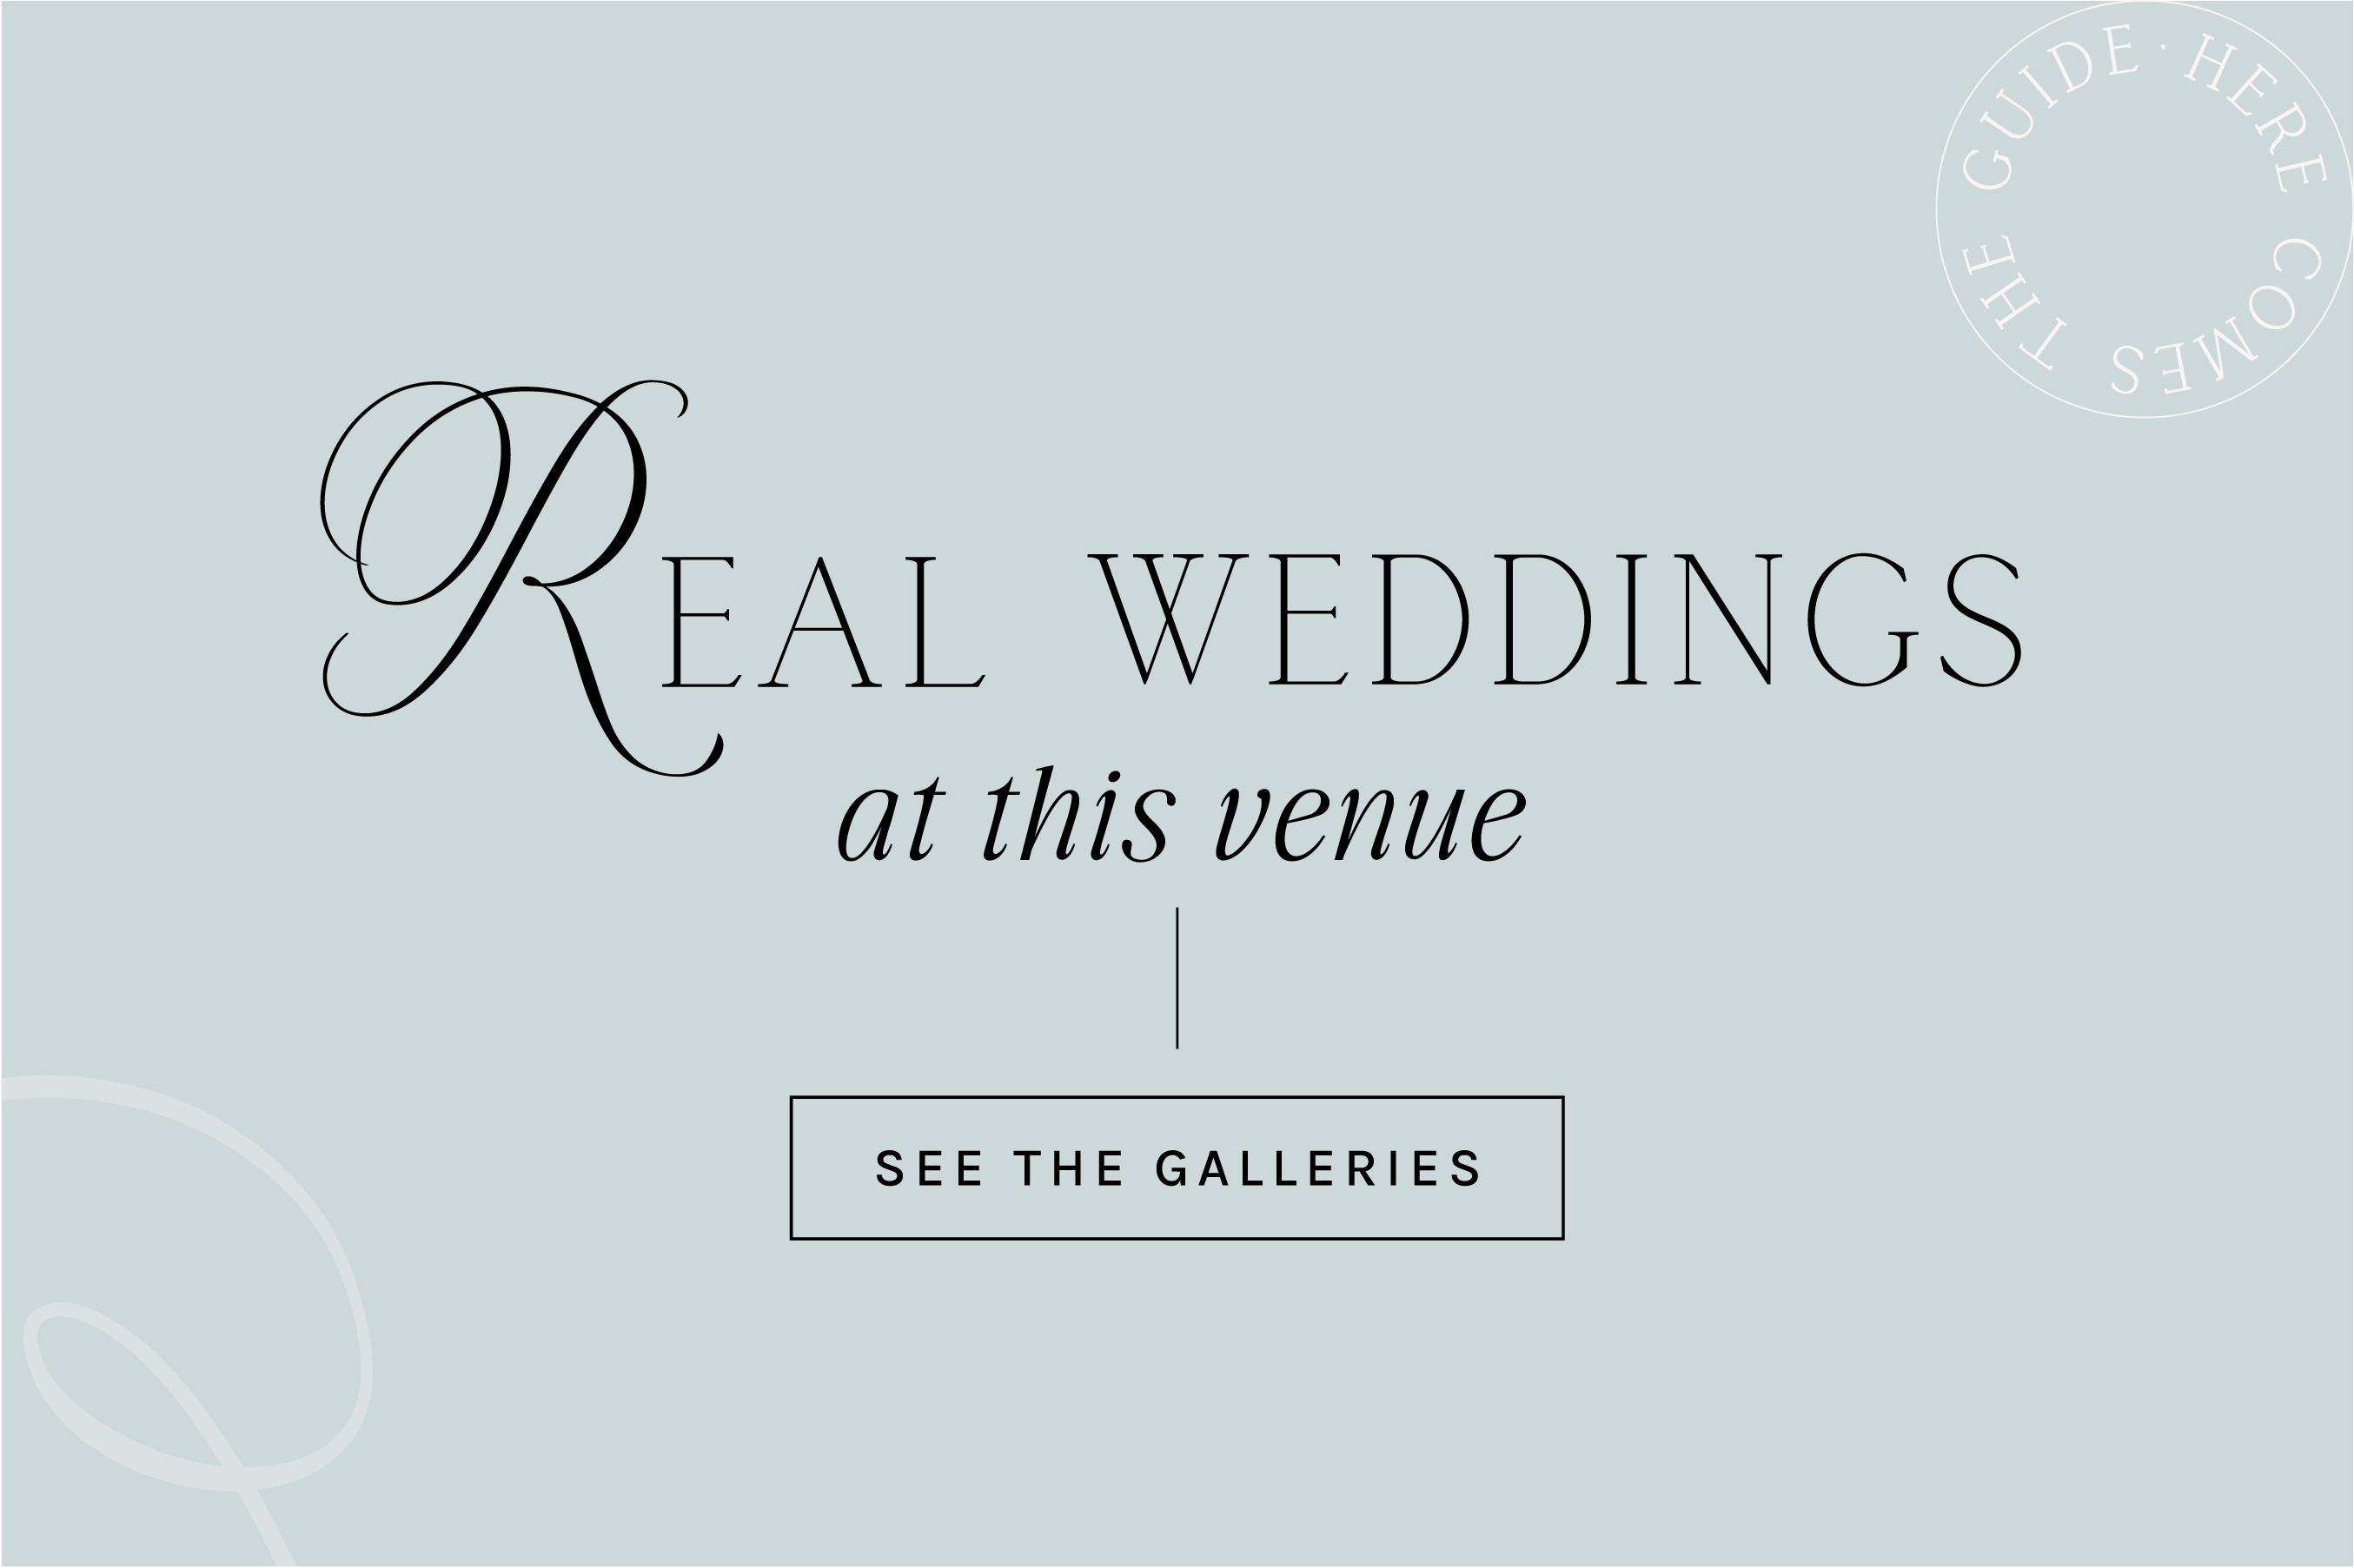 Interested in Real Weddings?